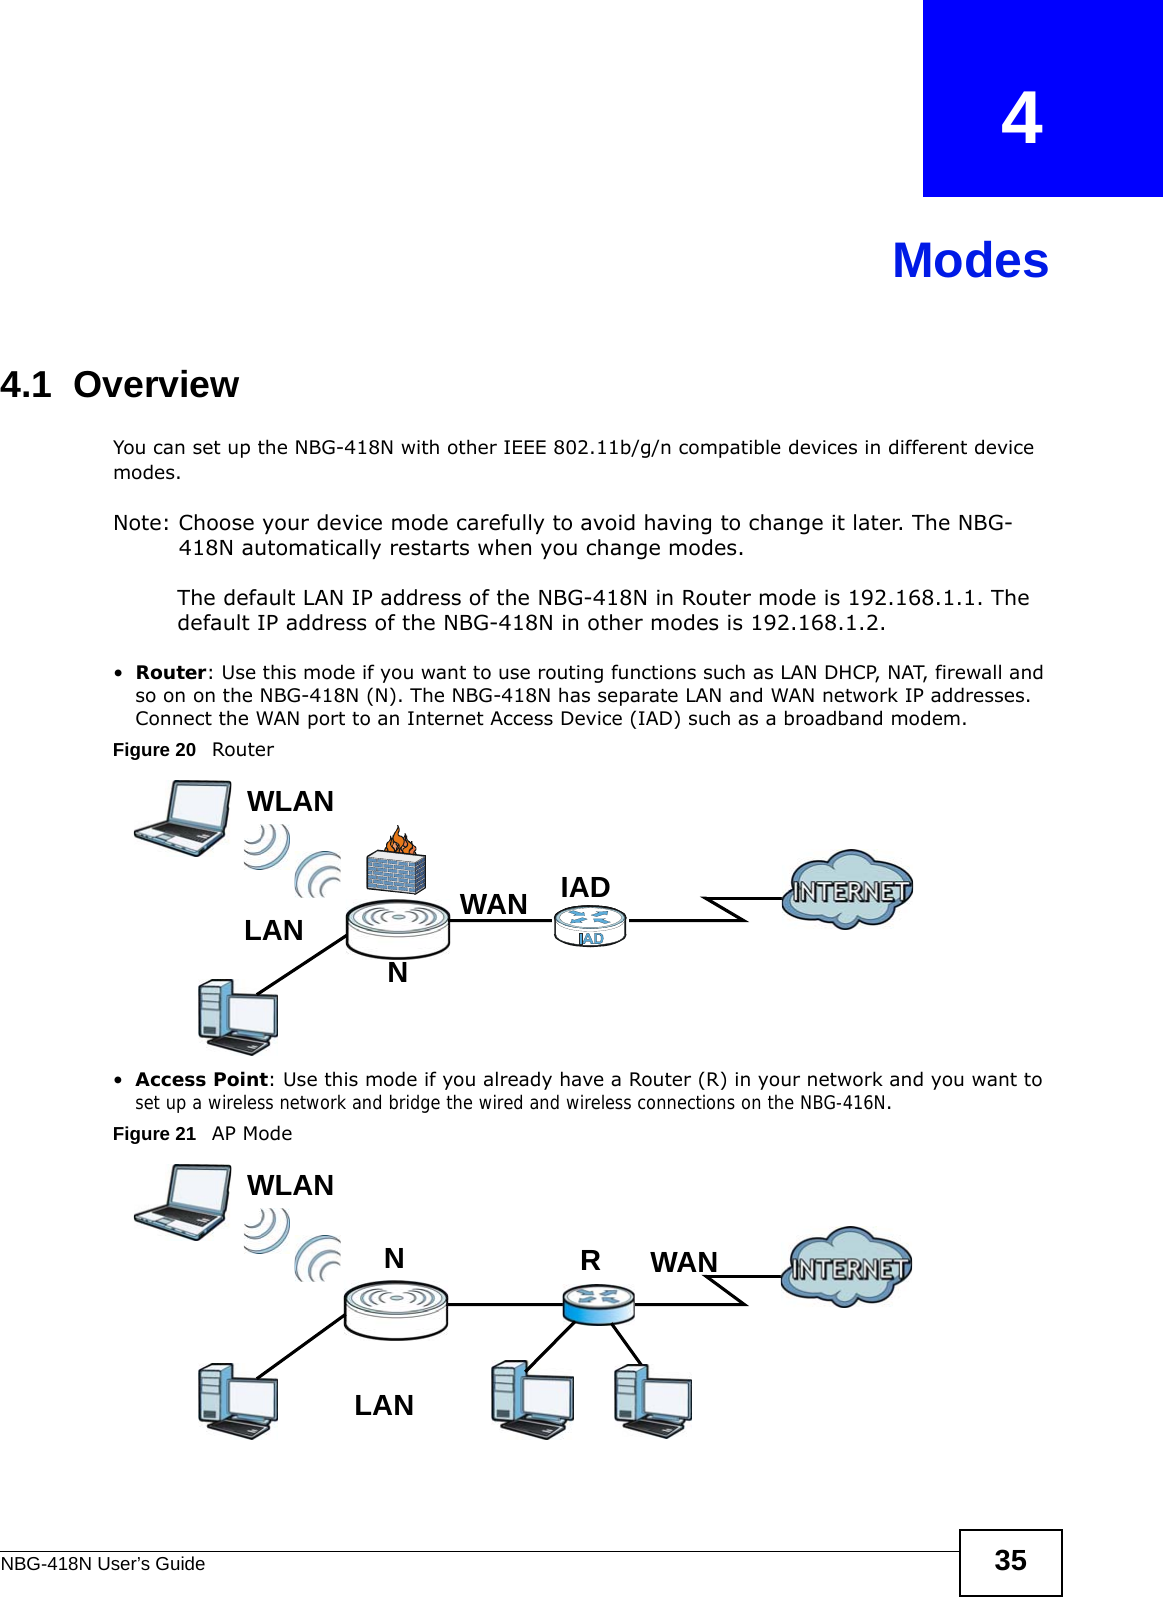 NBG-418N User’s Guide 35CHAPTER   4 Modes4.1  OverviewYou can set up the NBG-418N with other IEEE 802.11b/g/n compatible devices in different device modes.Note: Choose your device mode carefully to avoid having to change it later. The NBG-418N automatically restarts when you change modes.The default LAN IP address of the NBG-418N in Router mode is 192.168.1.1. The default IP address of the NBG-418N in other modes is 192.168.1.2.•Router: Use this mode if you want to use routing functions such as LAN DHCP, NAT, firewall and so on on the NBG-418N (N). The NBG-418N has separate LAN and WAN network IP addresses. Connect the WAN port to an Internet Access Device (IAD) such as a broadband modem.Figure 20   Router•Access Point: Use this mode if you already have a Router (R) in your network and you want to set up a wireless network and bridge the wired and wireless connections on the NBG-416N.Figure 21   AP Mode LEWWLANLAN WANNIADLEWWLANLANWANNR